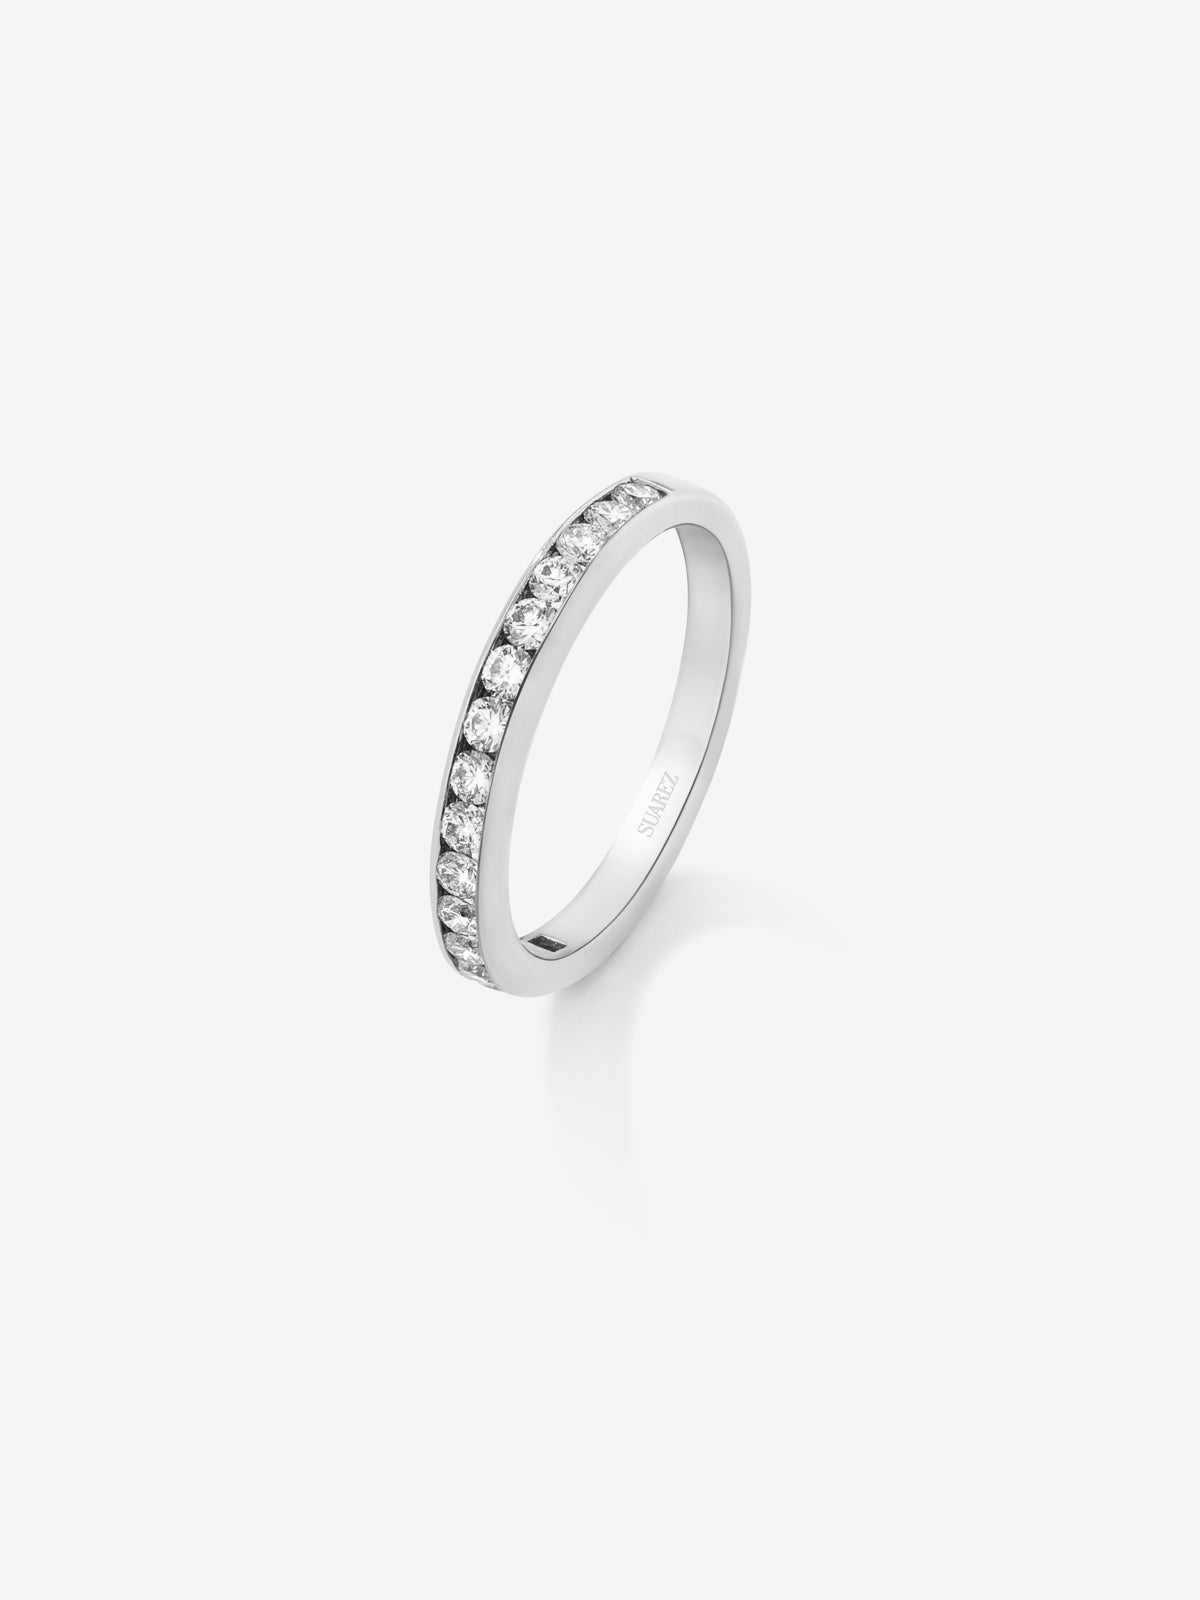 Half ring in 18K white gold with 16 brilliant-cut diamonds with a total of 0.5 cts